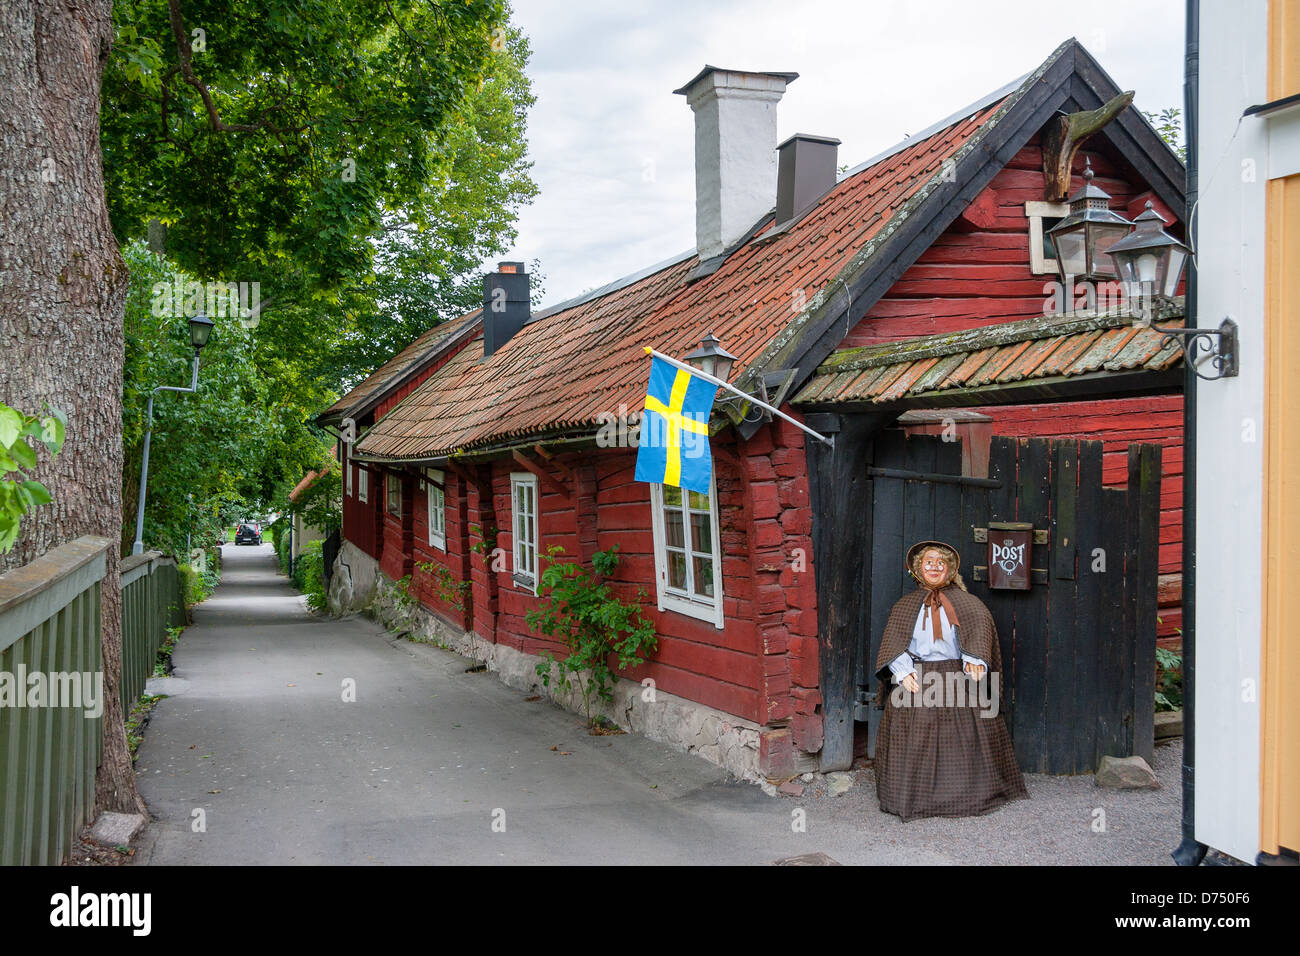 Sigtuna town. Sweden Stock Photo